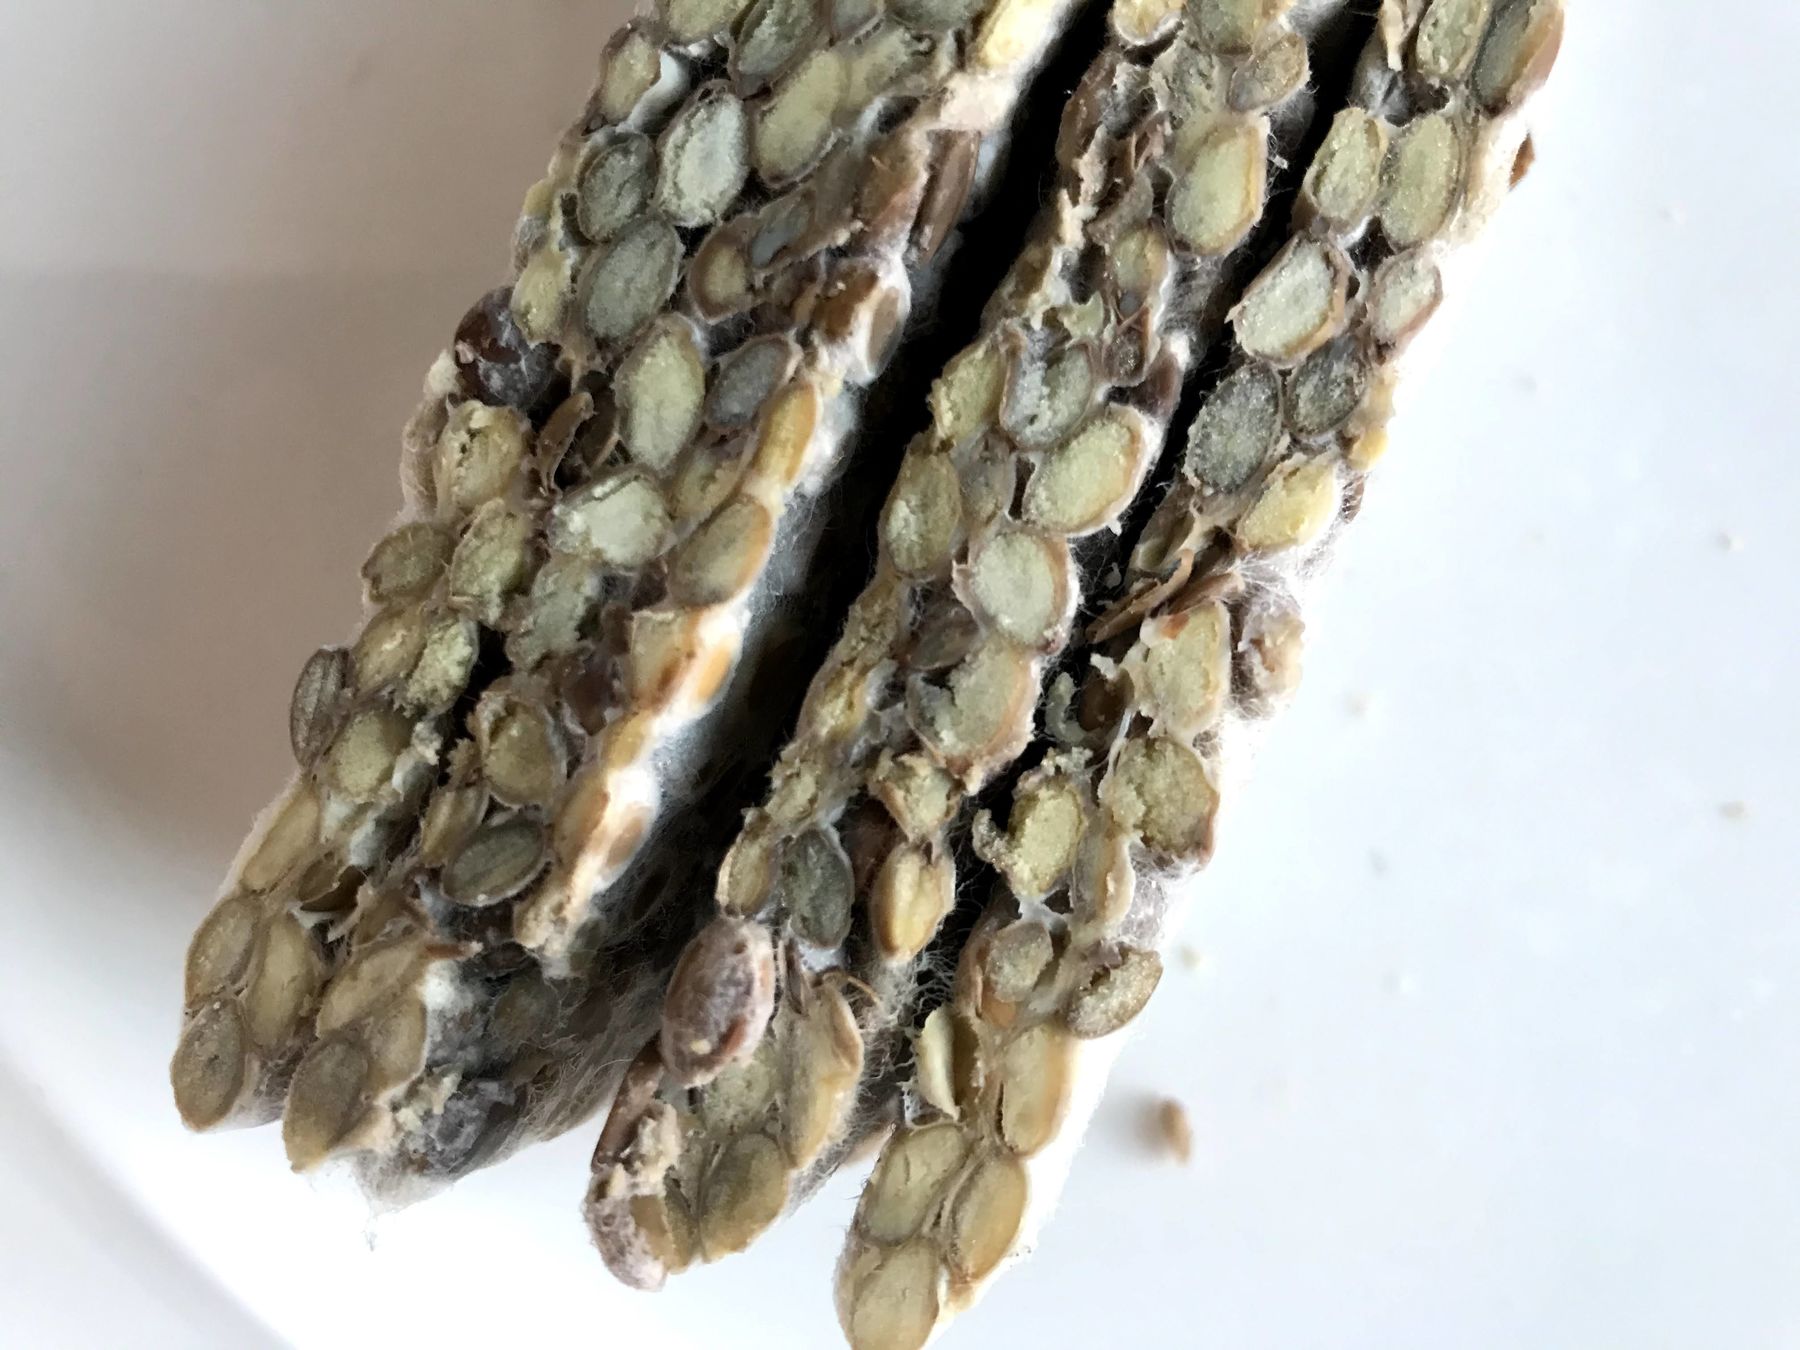 lentils tempeh mycelium mixture cut and shown from a side